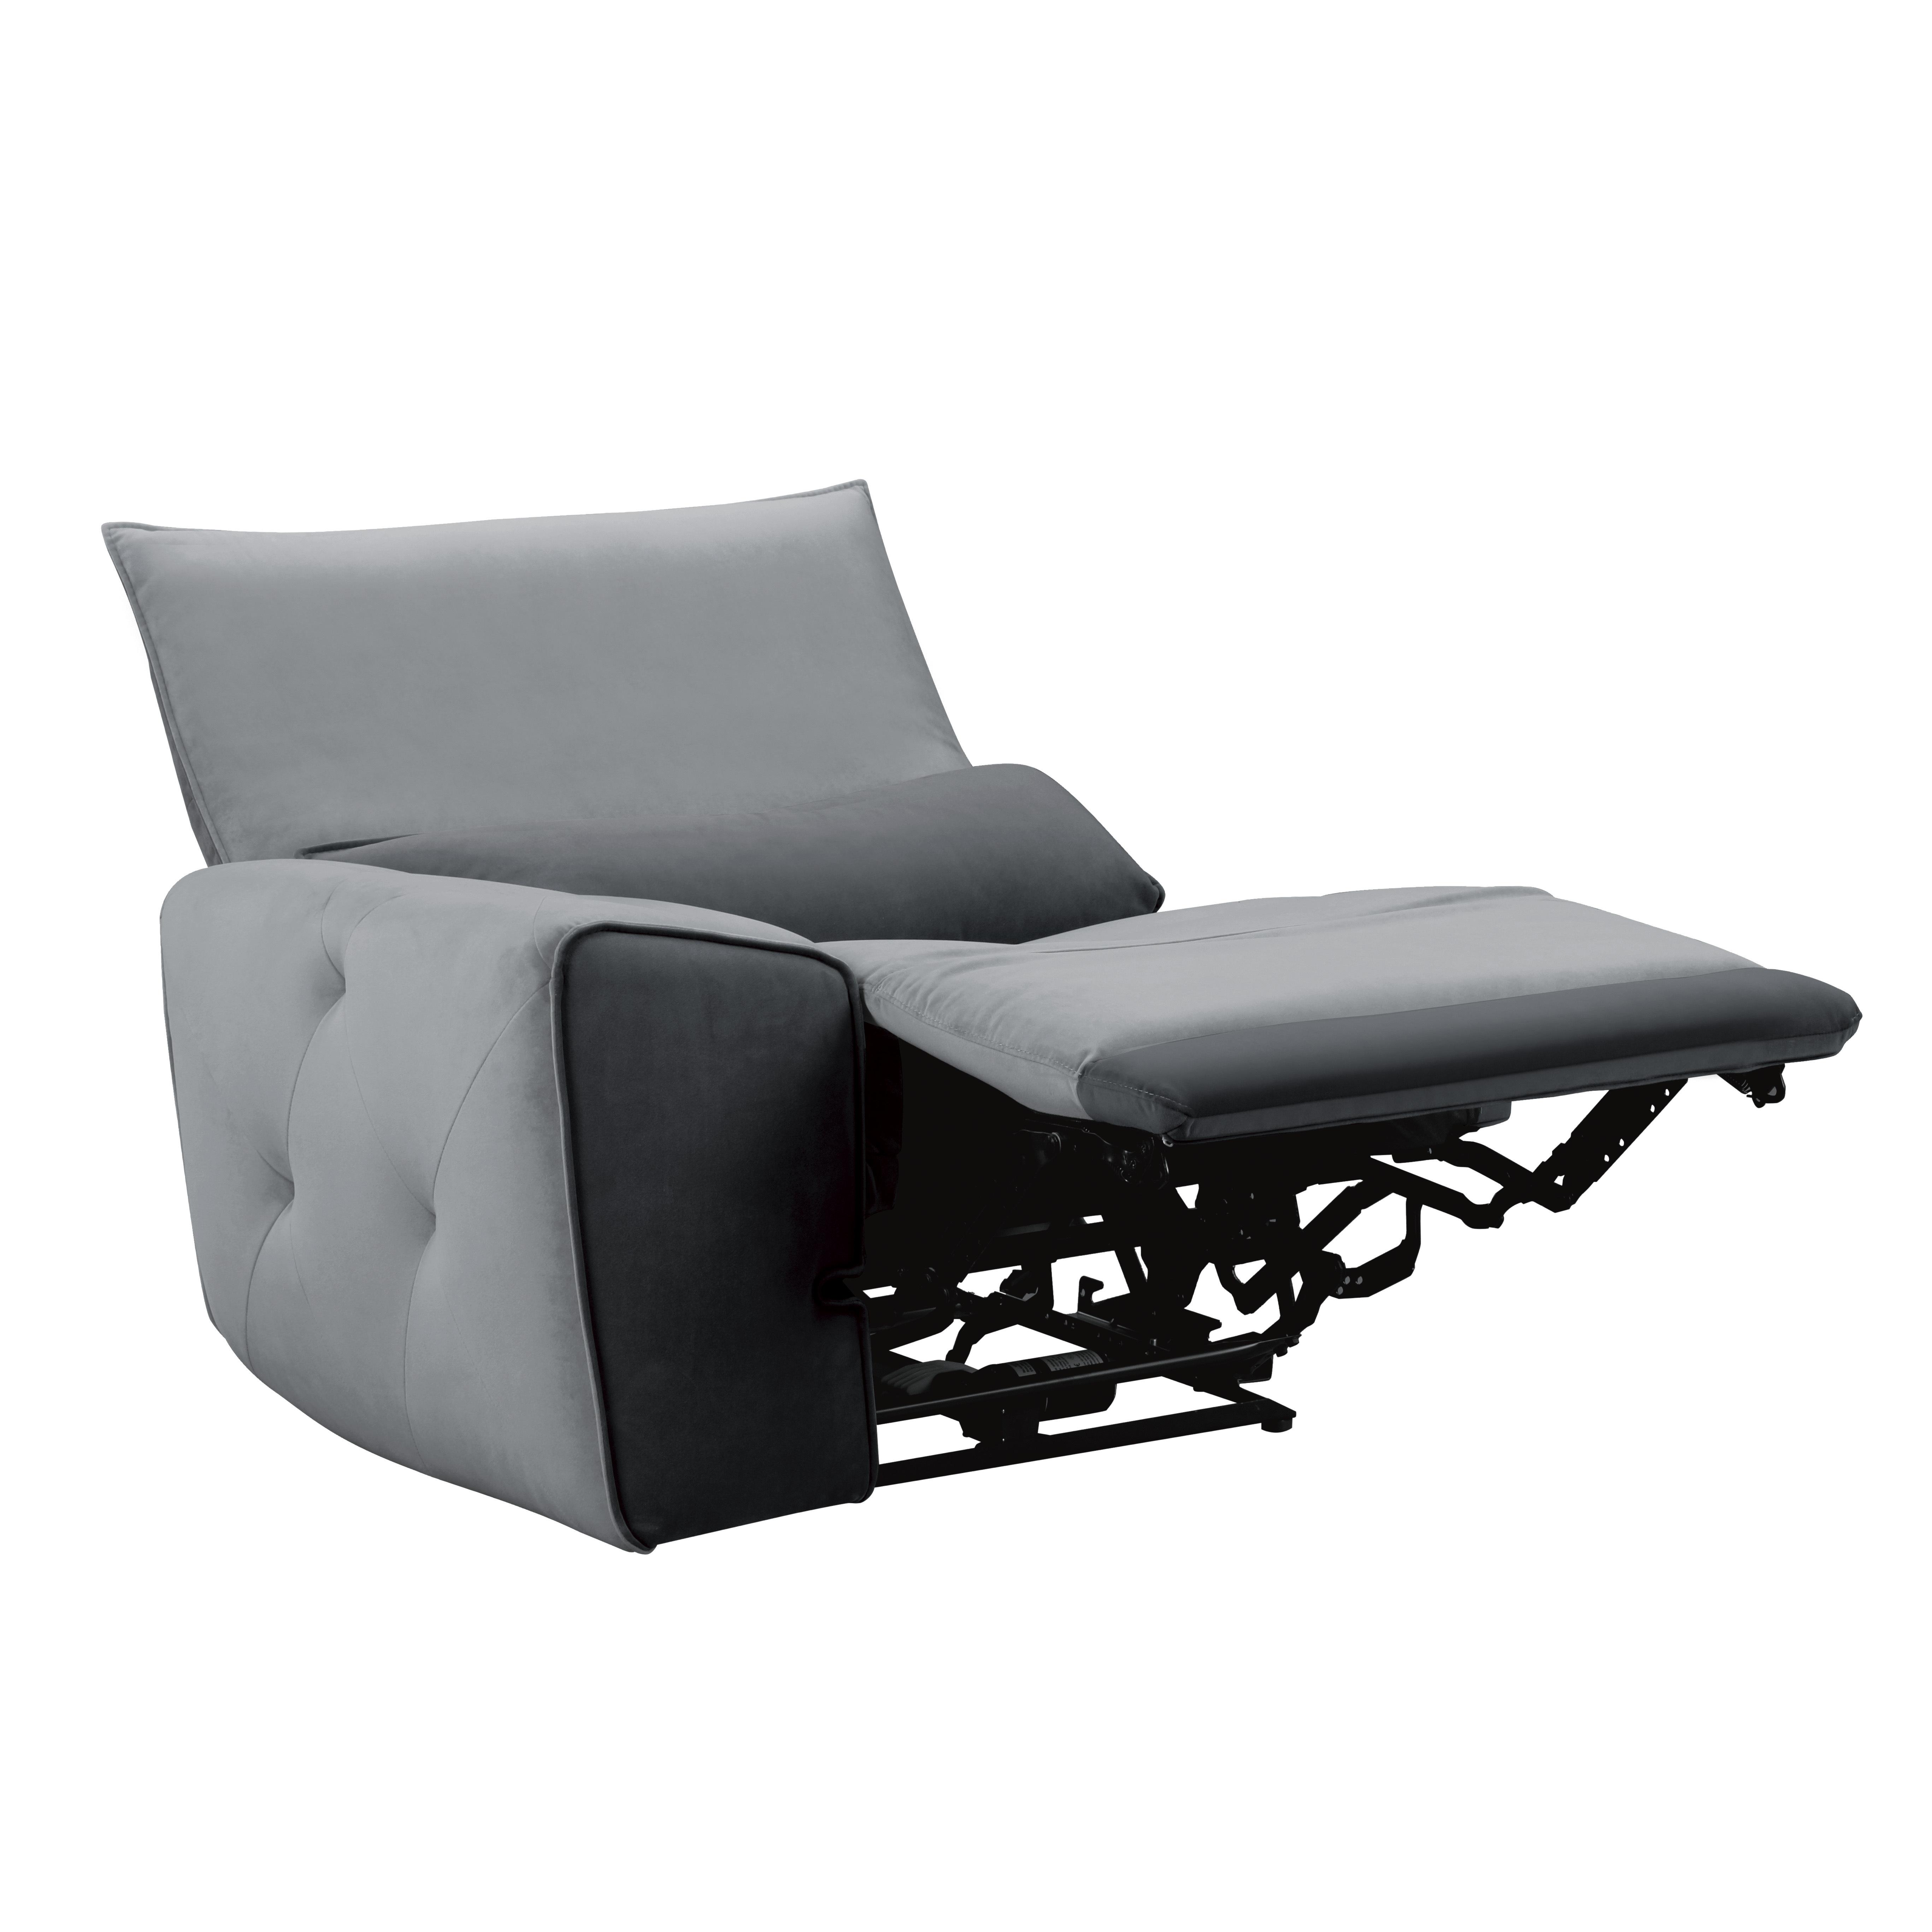 

    
Homelegance 9459GY-LRPW Helix Power Reclining Chair Gray 9459GY-LRPW
